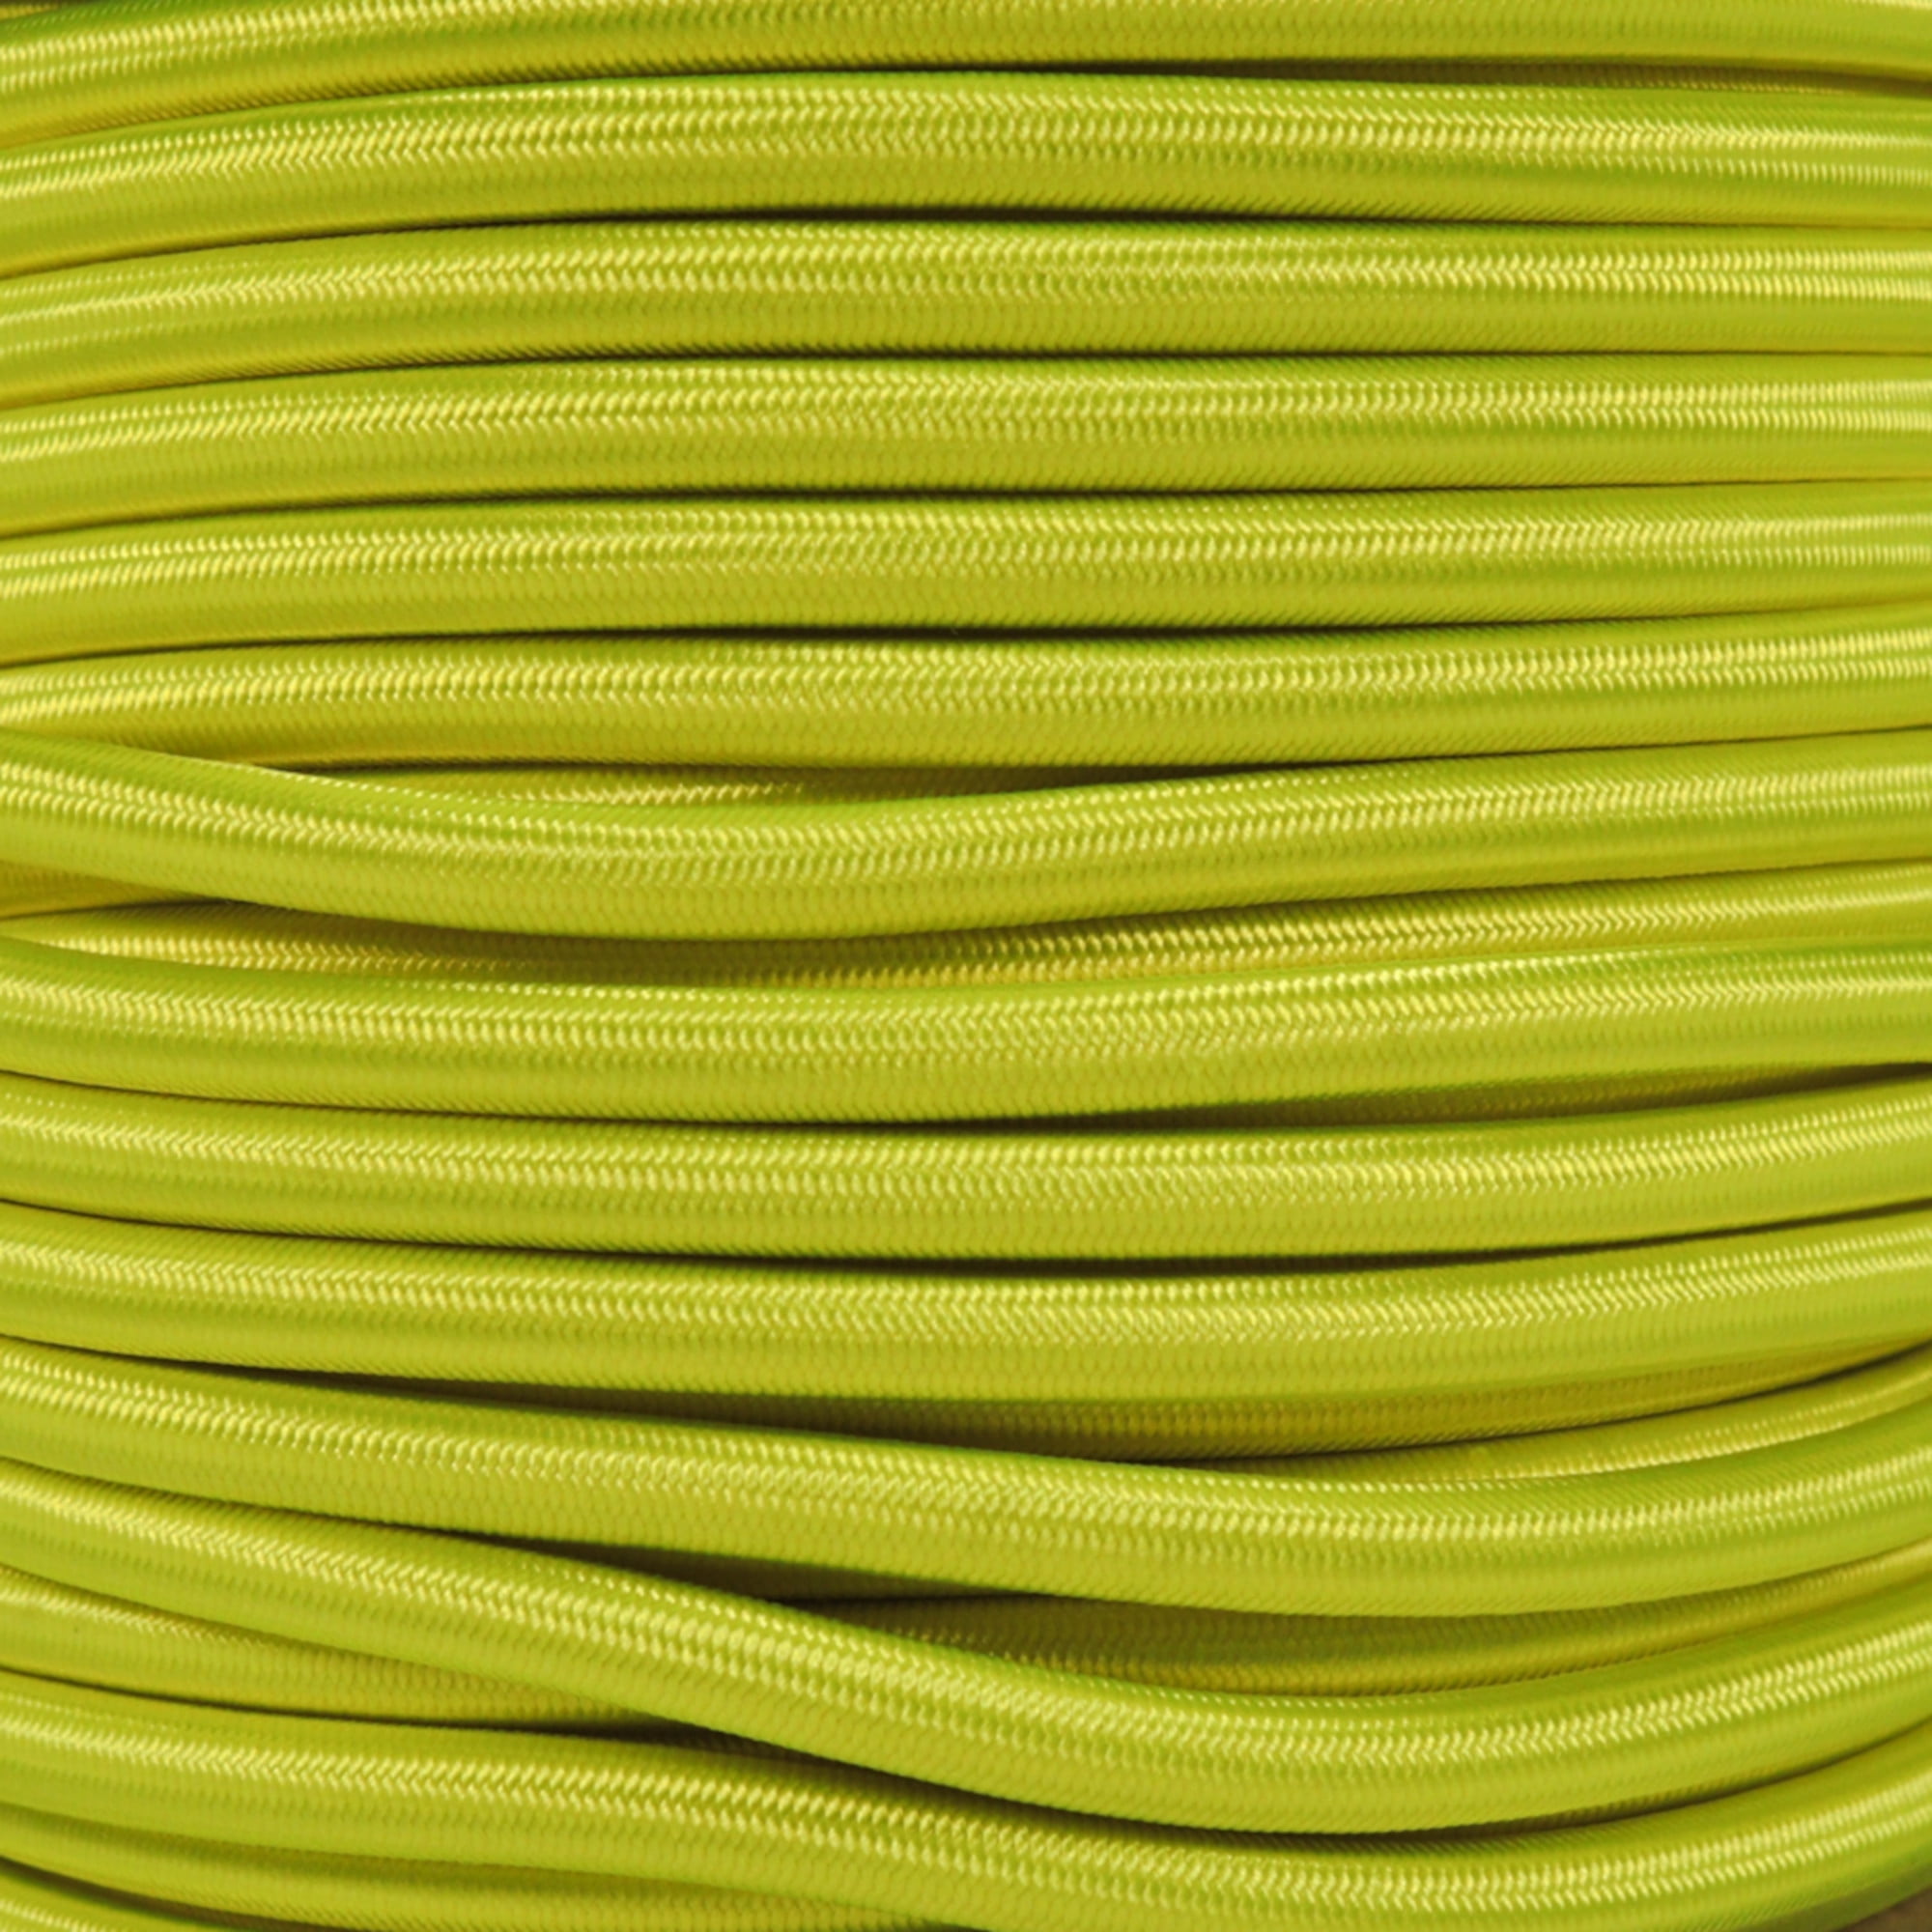 5mm Fluorescent Yellow Elastic Bungee Rope Shock Cord Tie Down UV Stable 